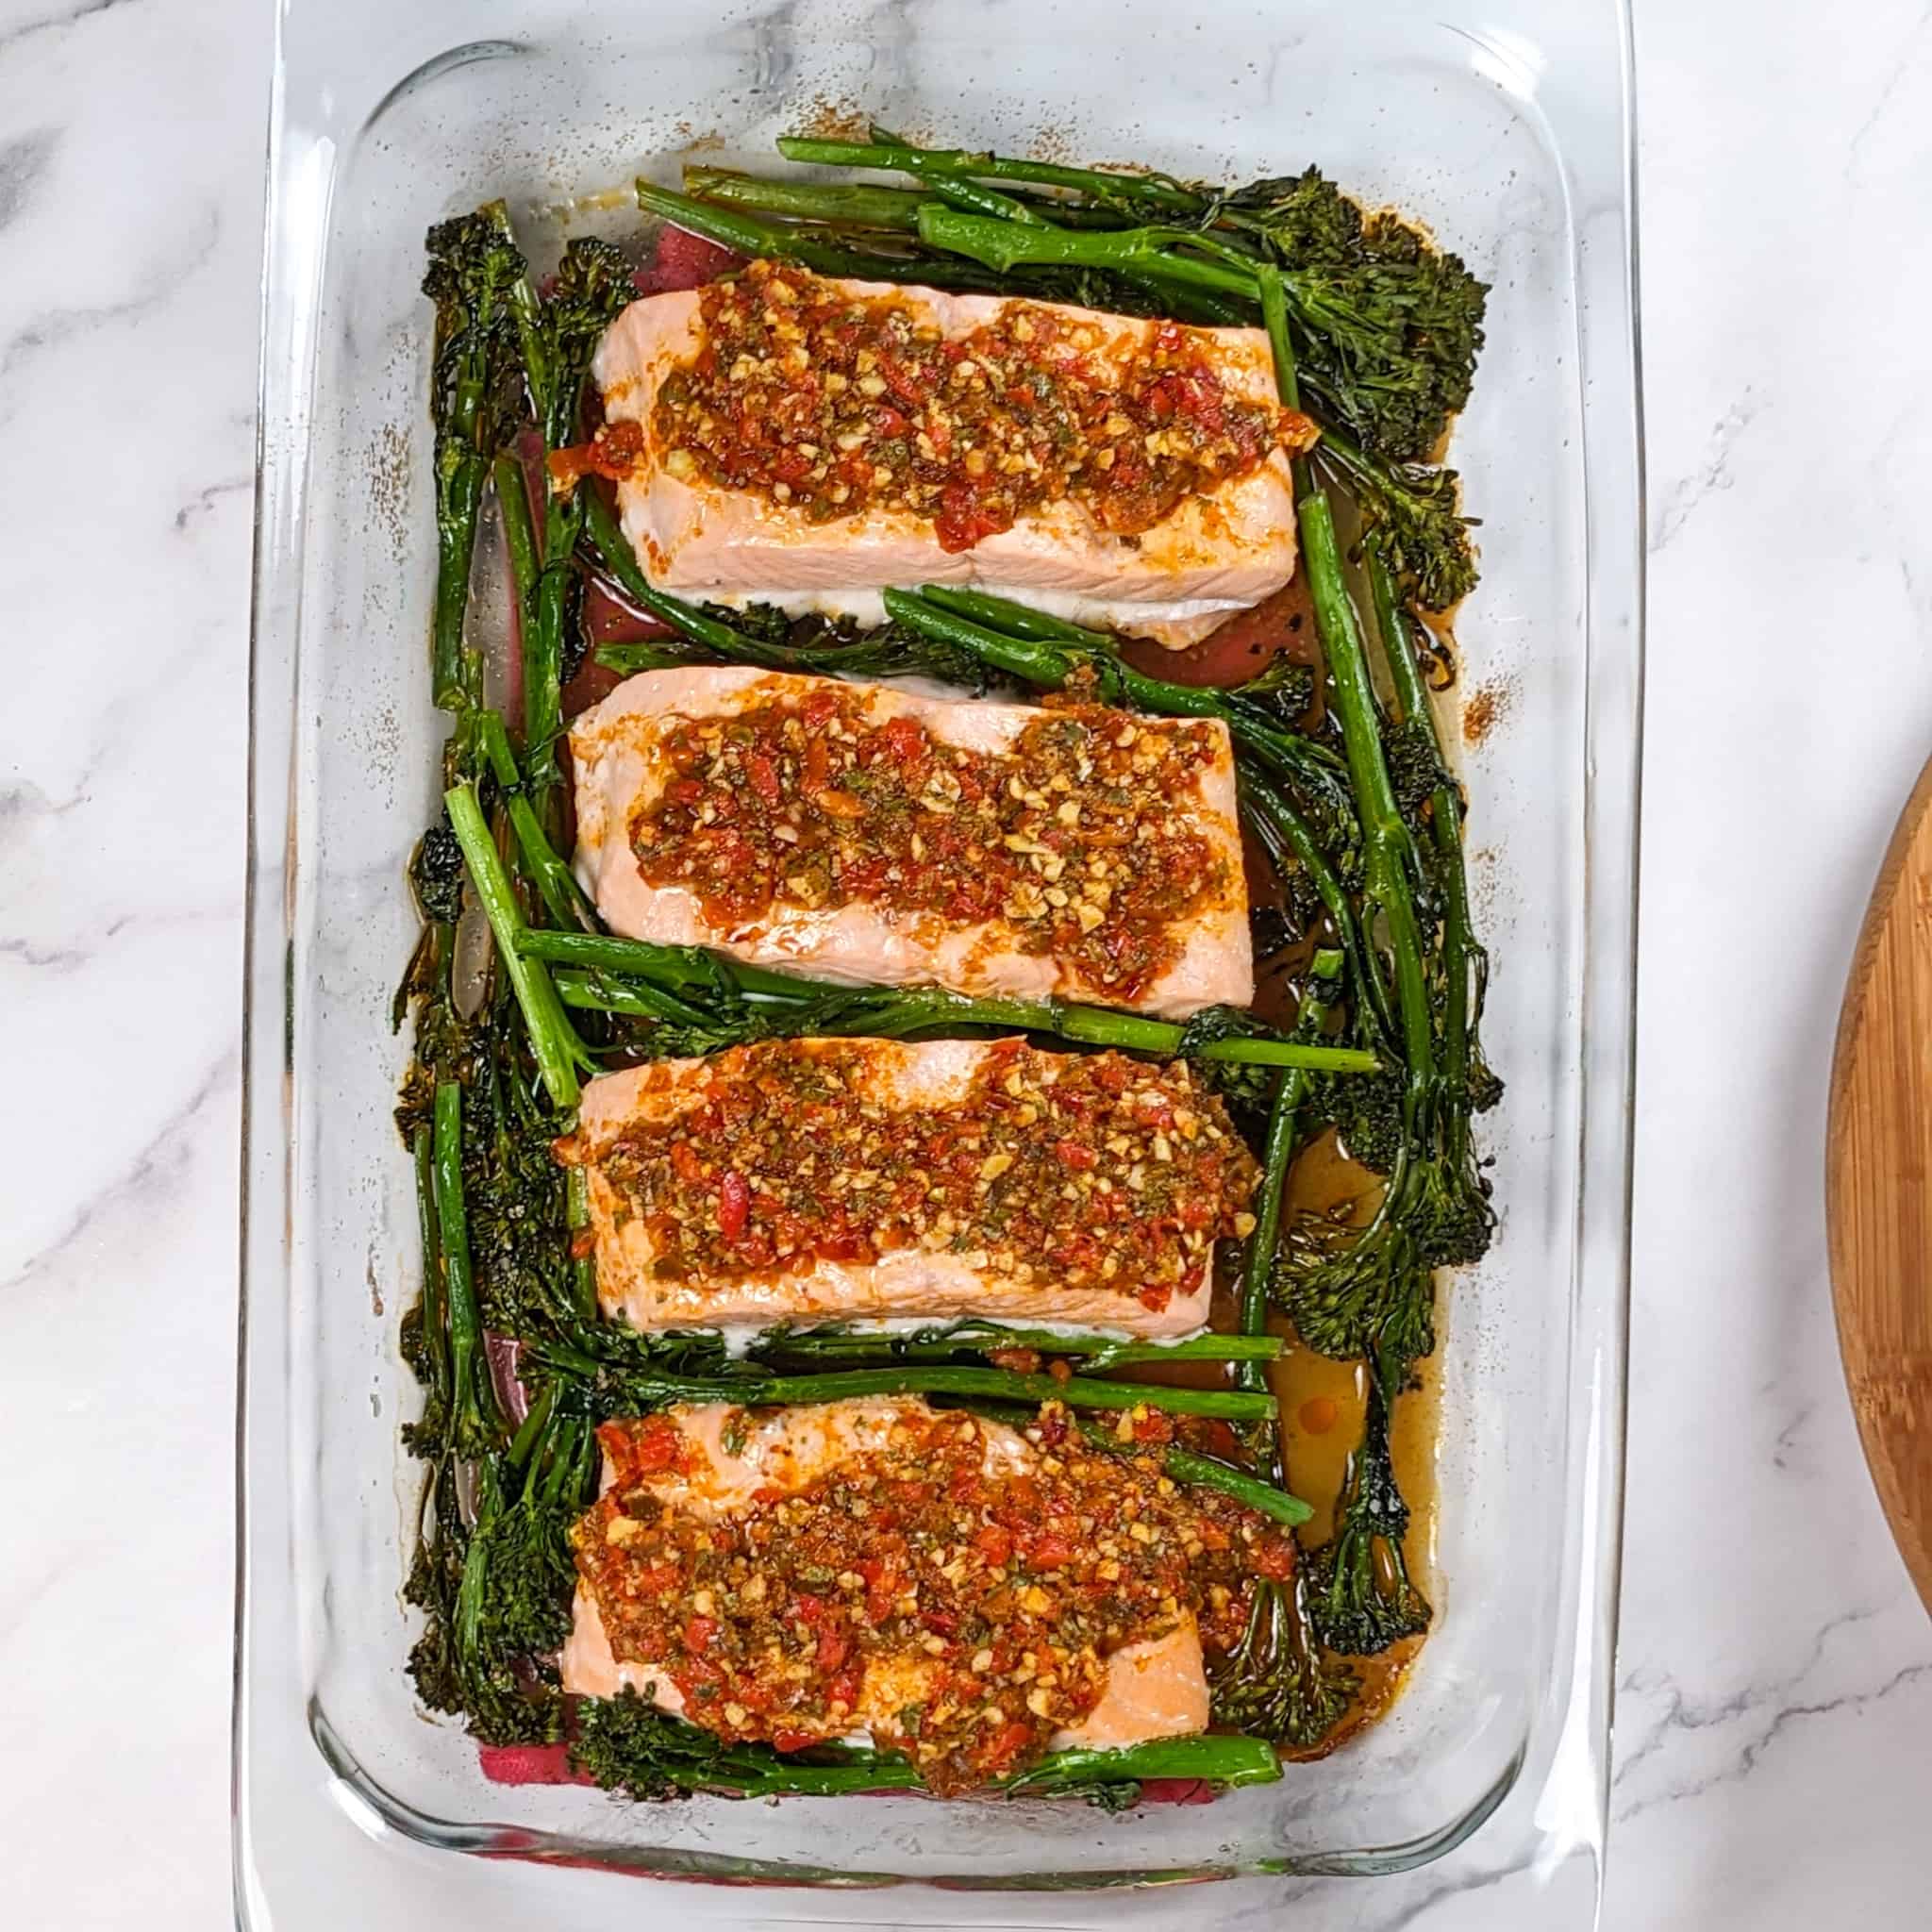 Top view of the Calabrian Pepper Basil Baked Salmon and Broccolini in a large glass rectangle baking dish